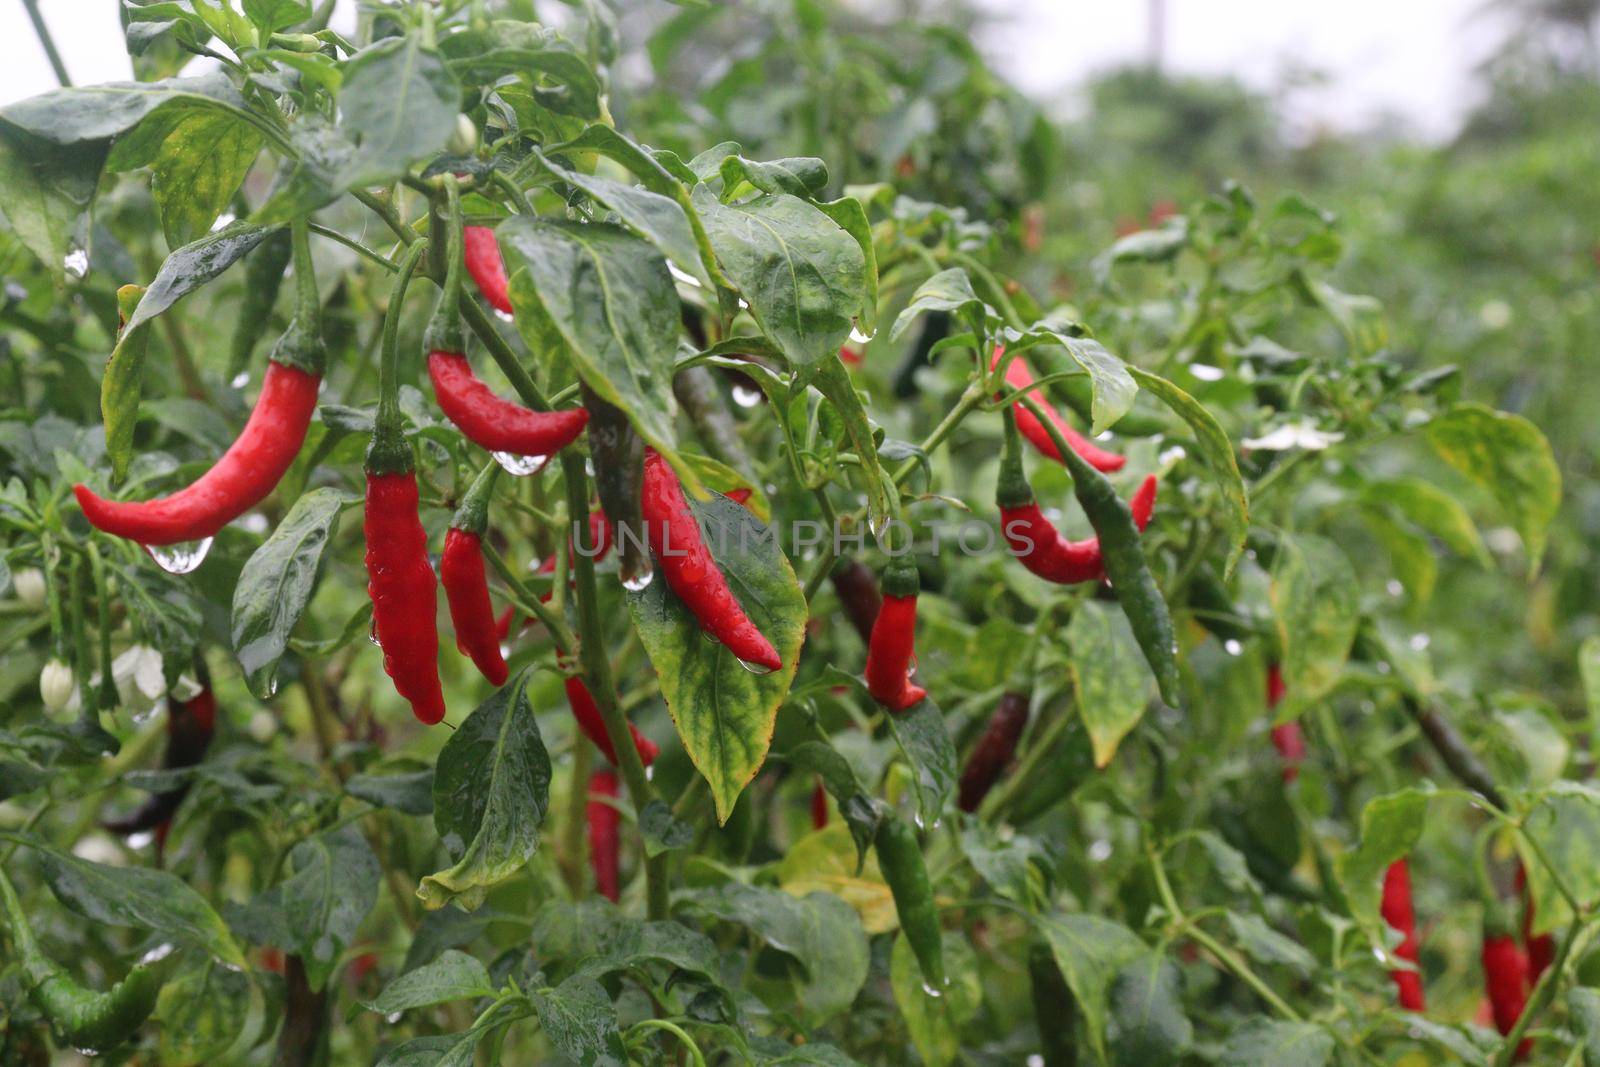 red colored chili on tree in farm for harvest